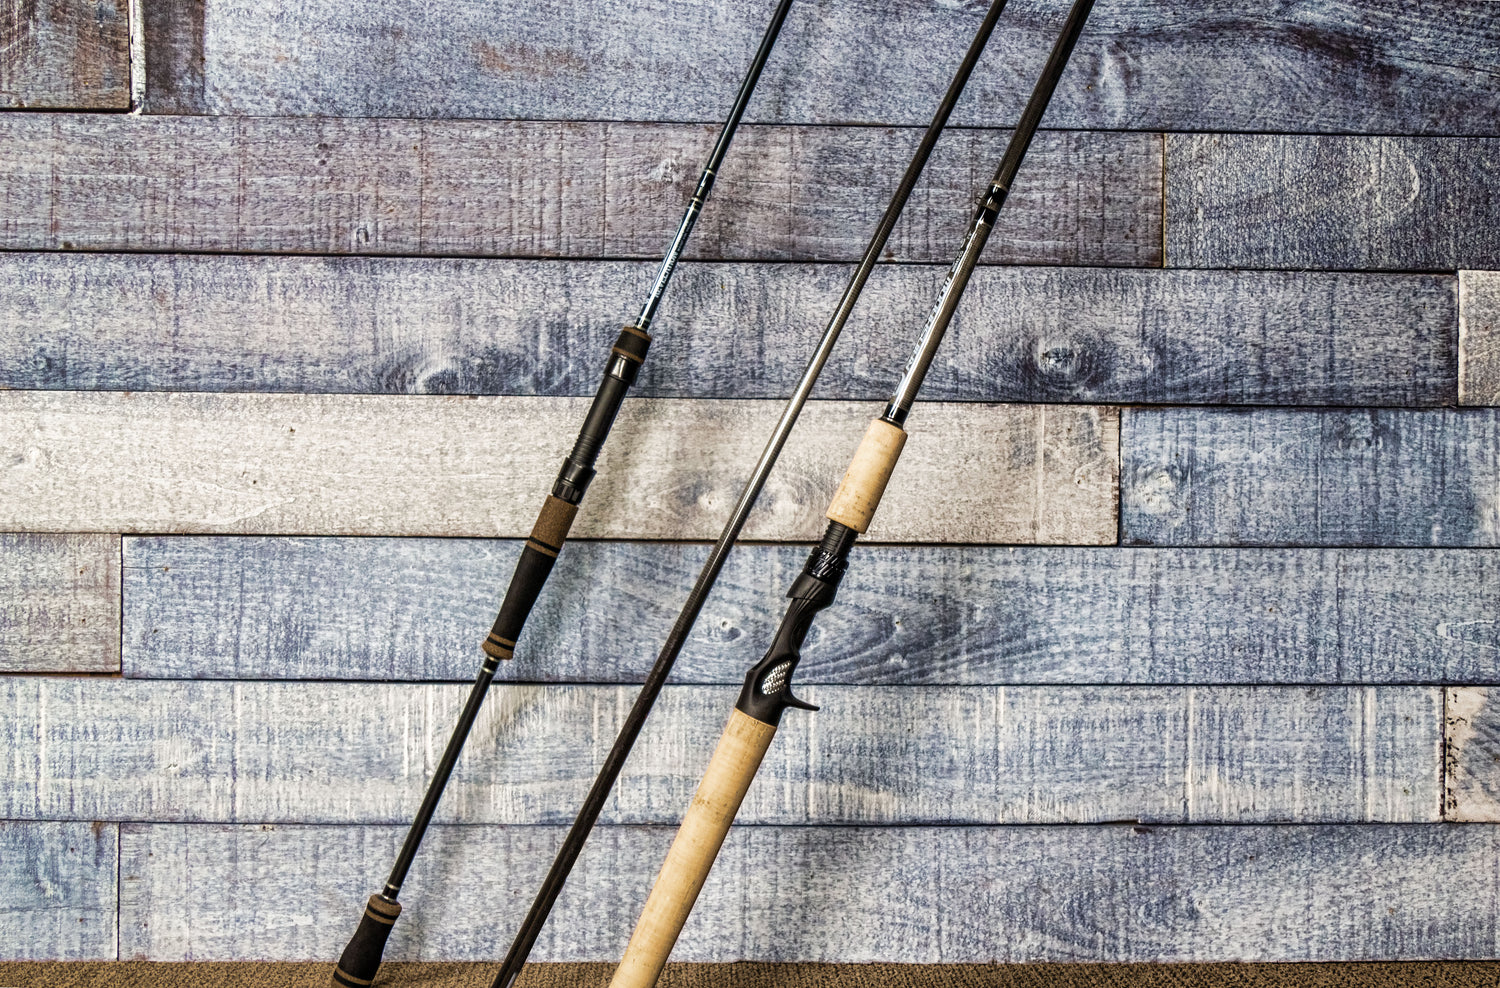 RX6 blanks have been significantly refined to offer enhanced sensitivity to feel every bite and added strength for brute lifting power. The possibilities are endless with this extensive blank lineup.